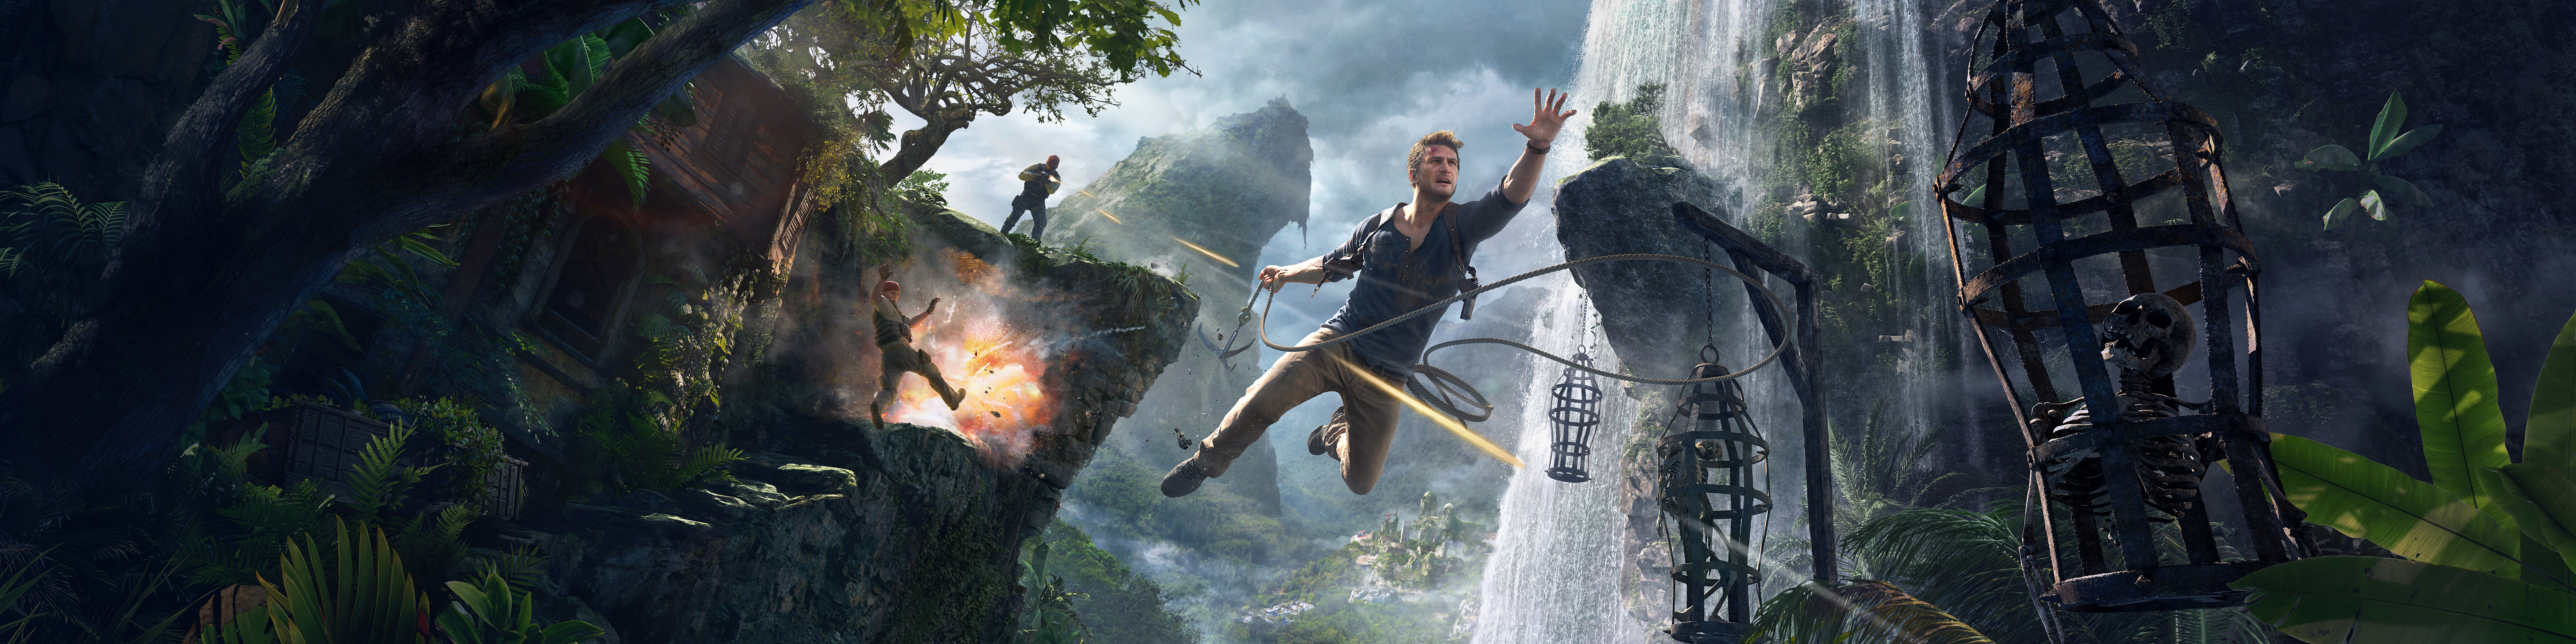 uncharted 4: a thief's end, uncharted, nathan drake, video game cellphone